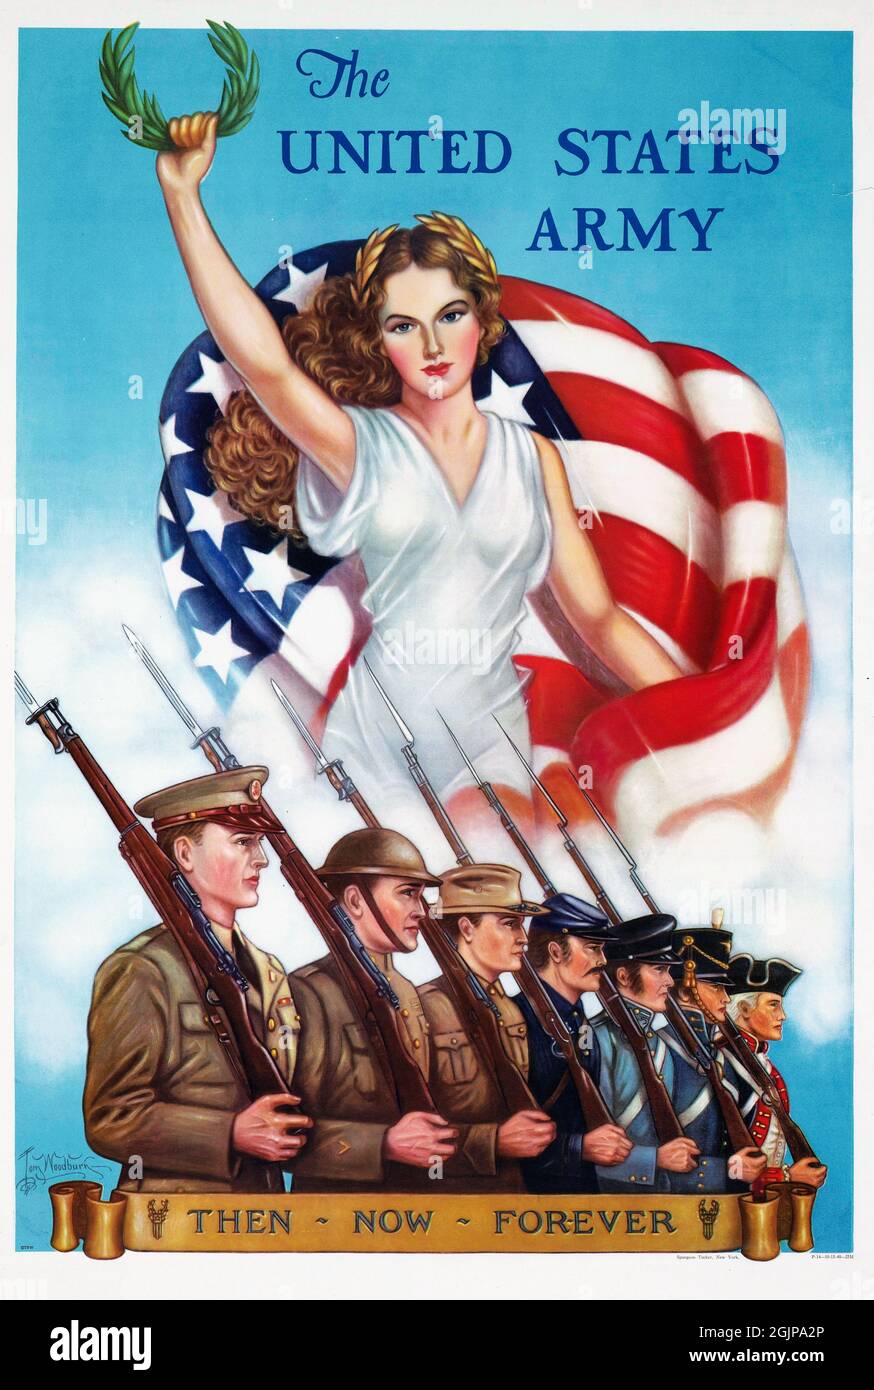 'The United States Army - Then, Now, Forever' poster Stock Photo